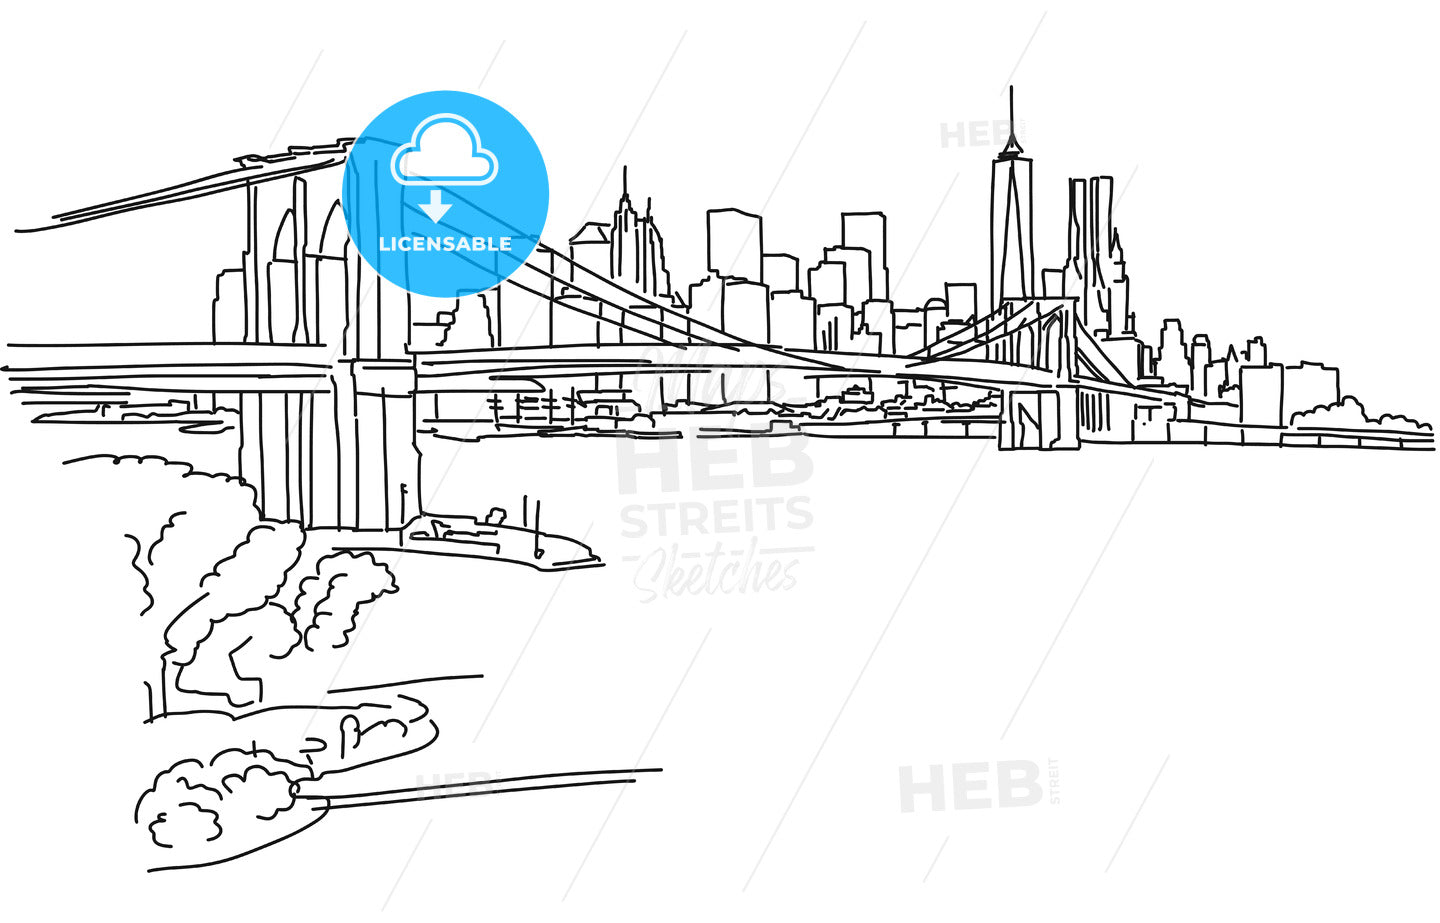 New York Panorama with brooklyn bridge – instant download